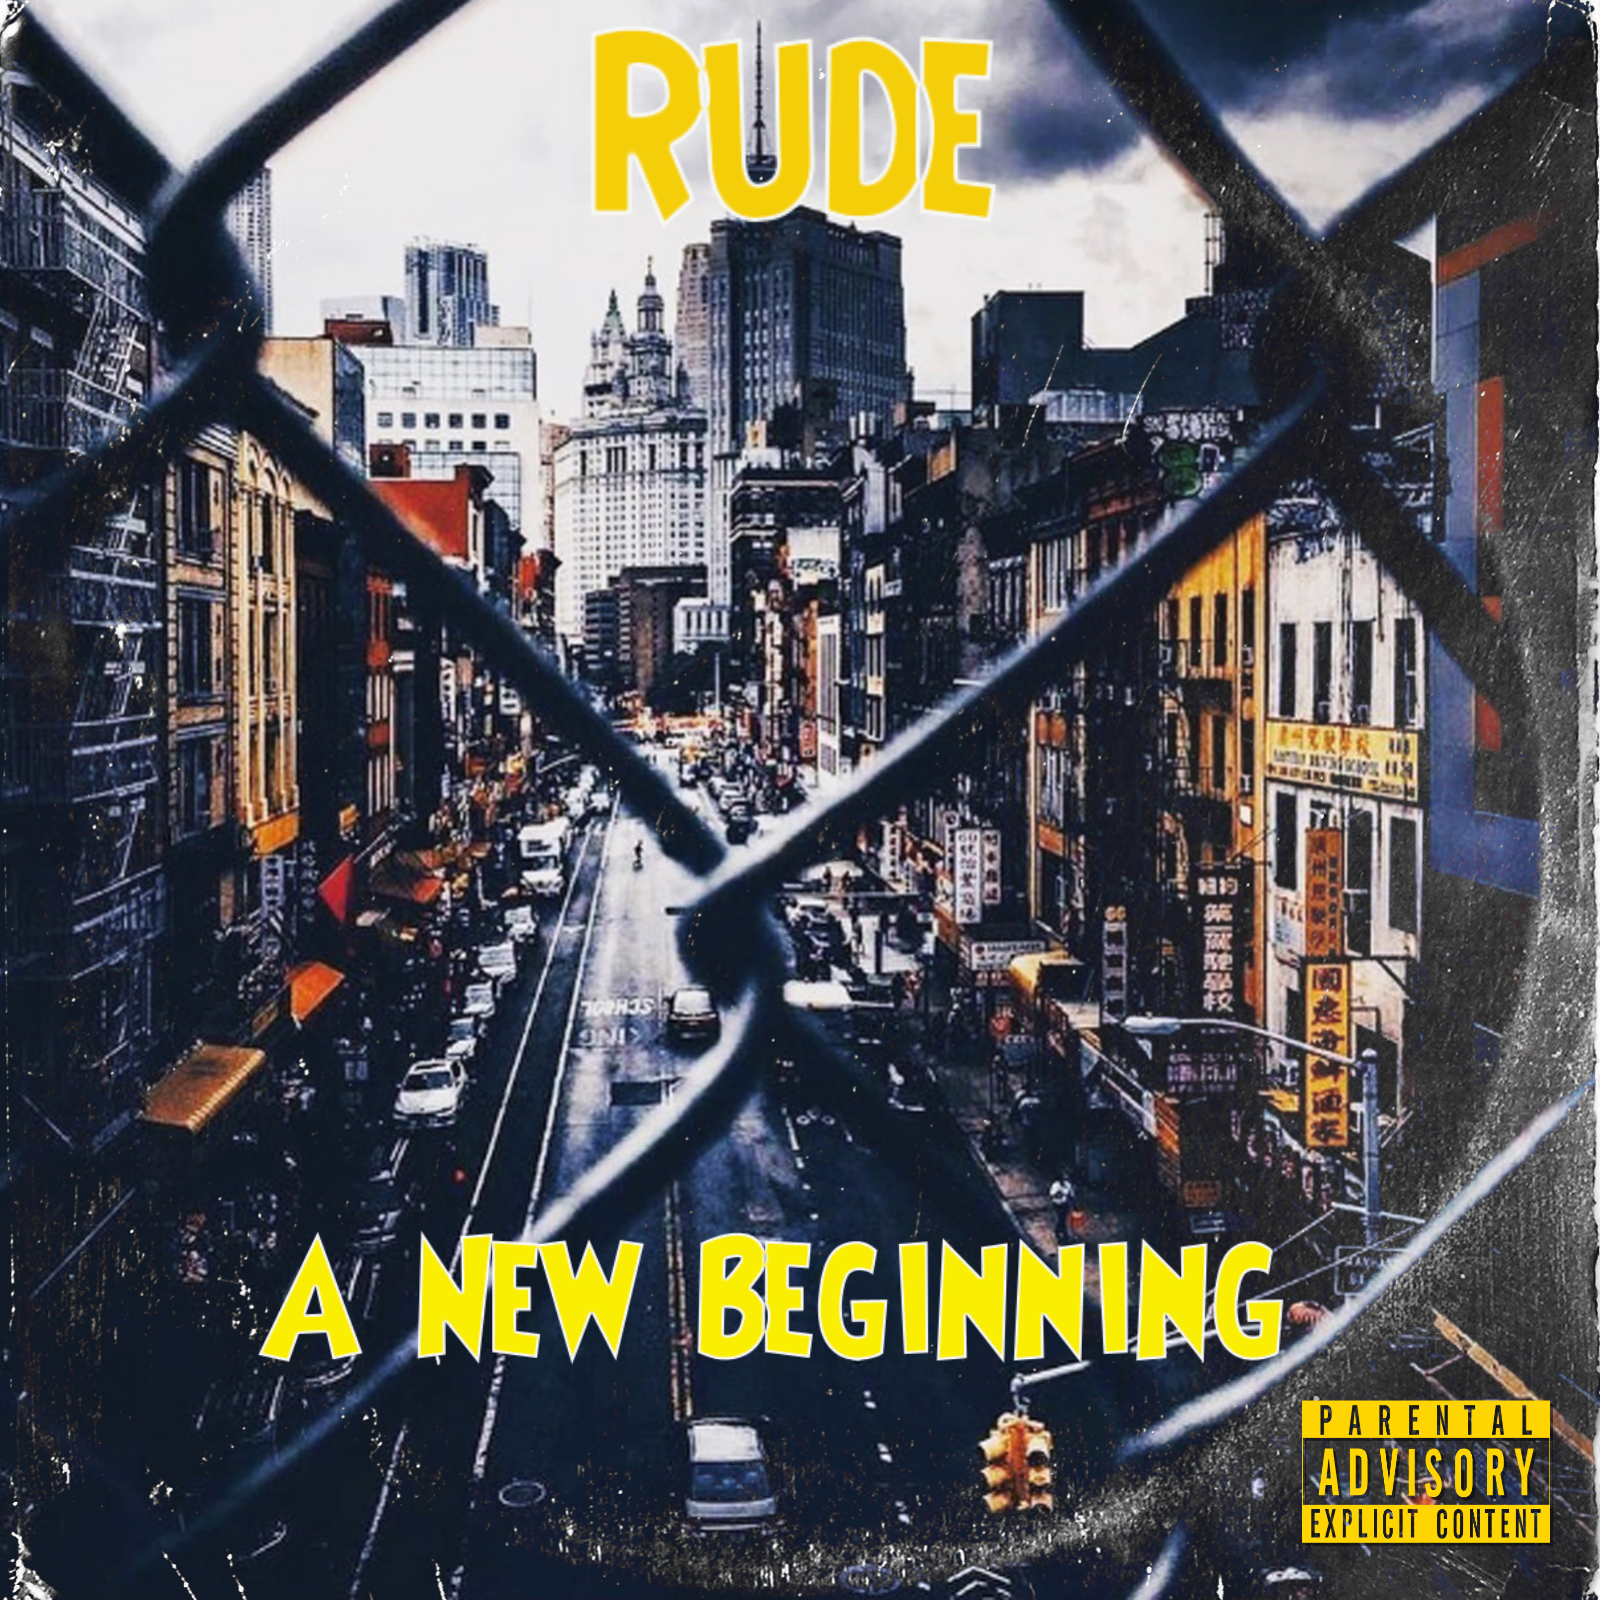 Art for Believe In Me by Rude